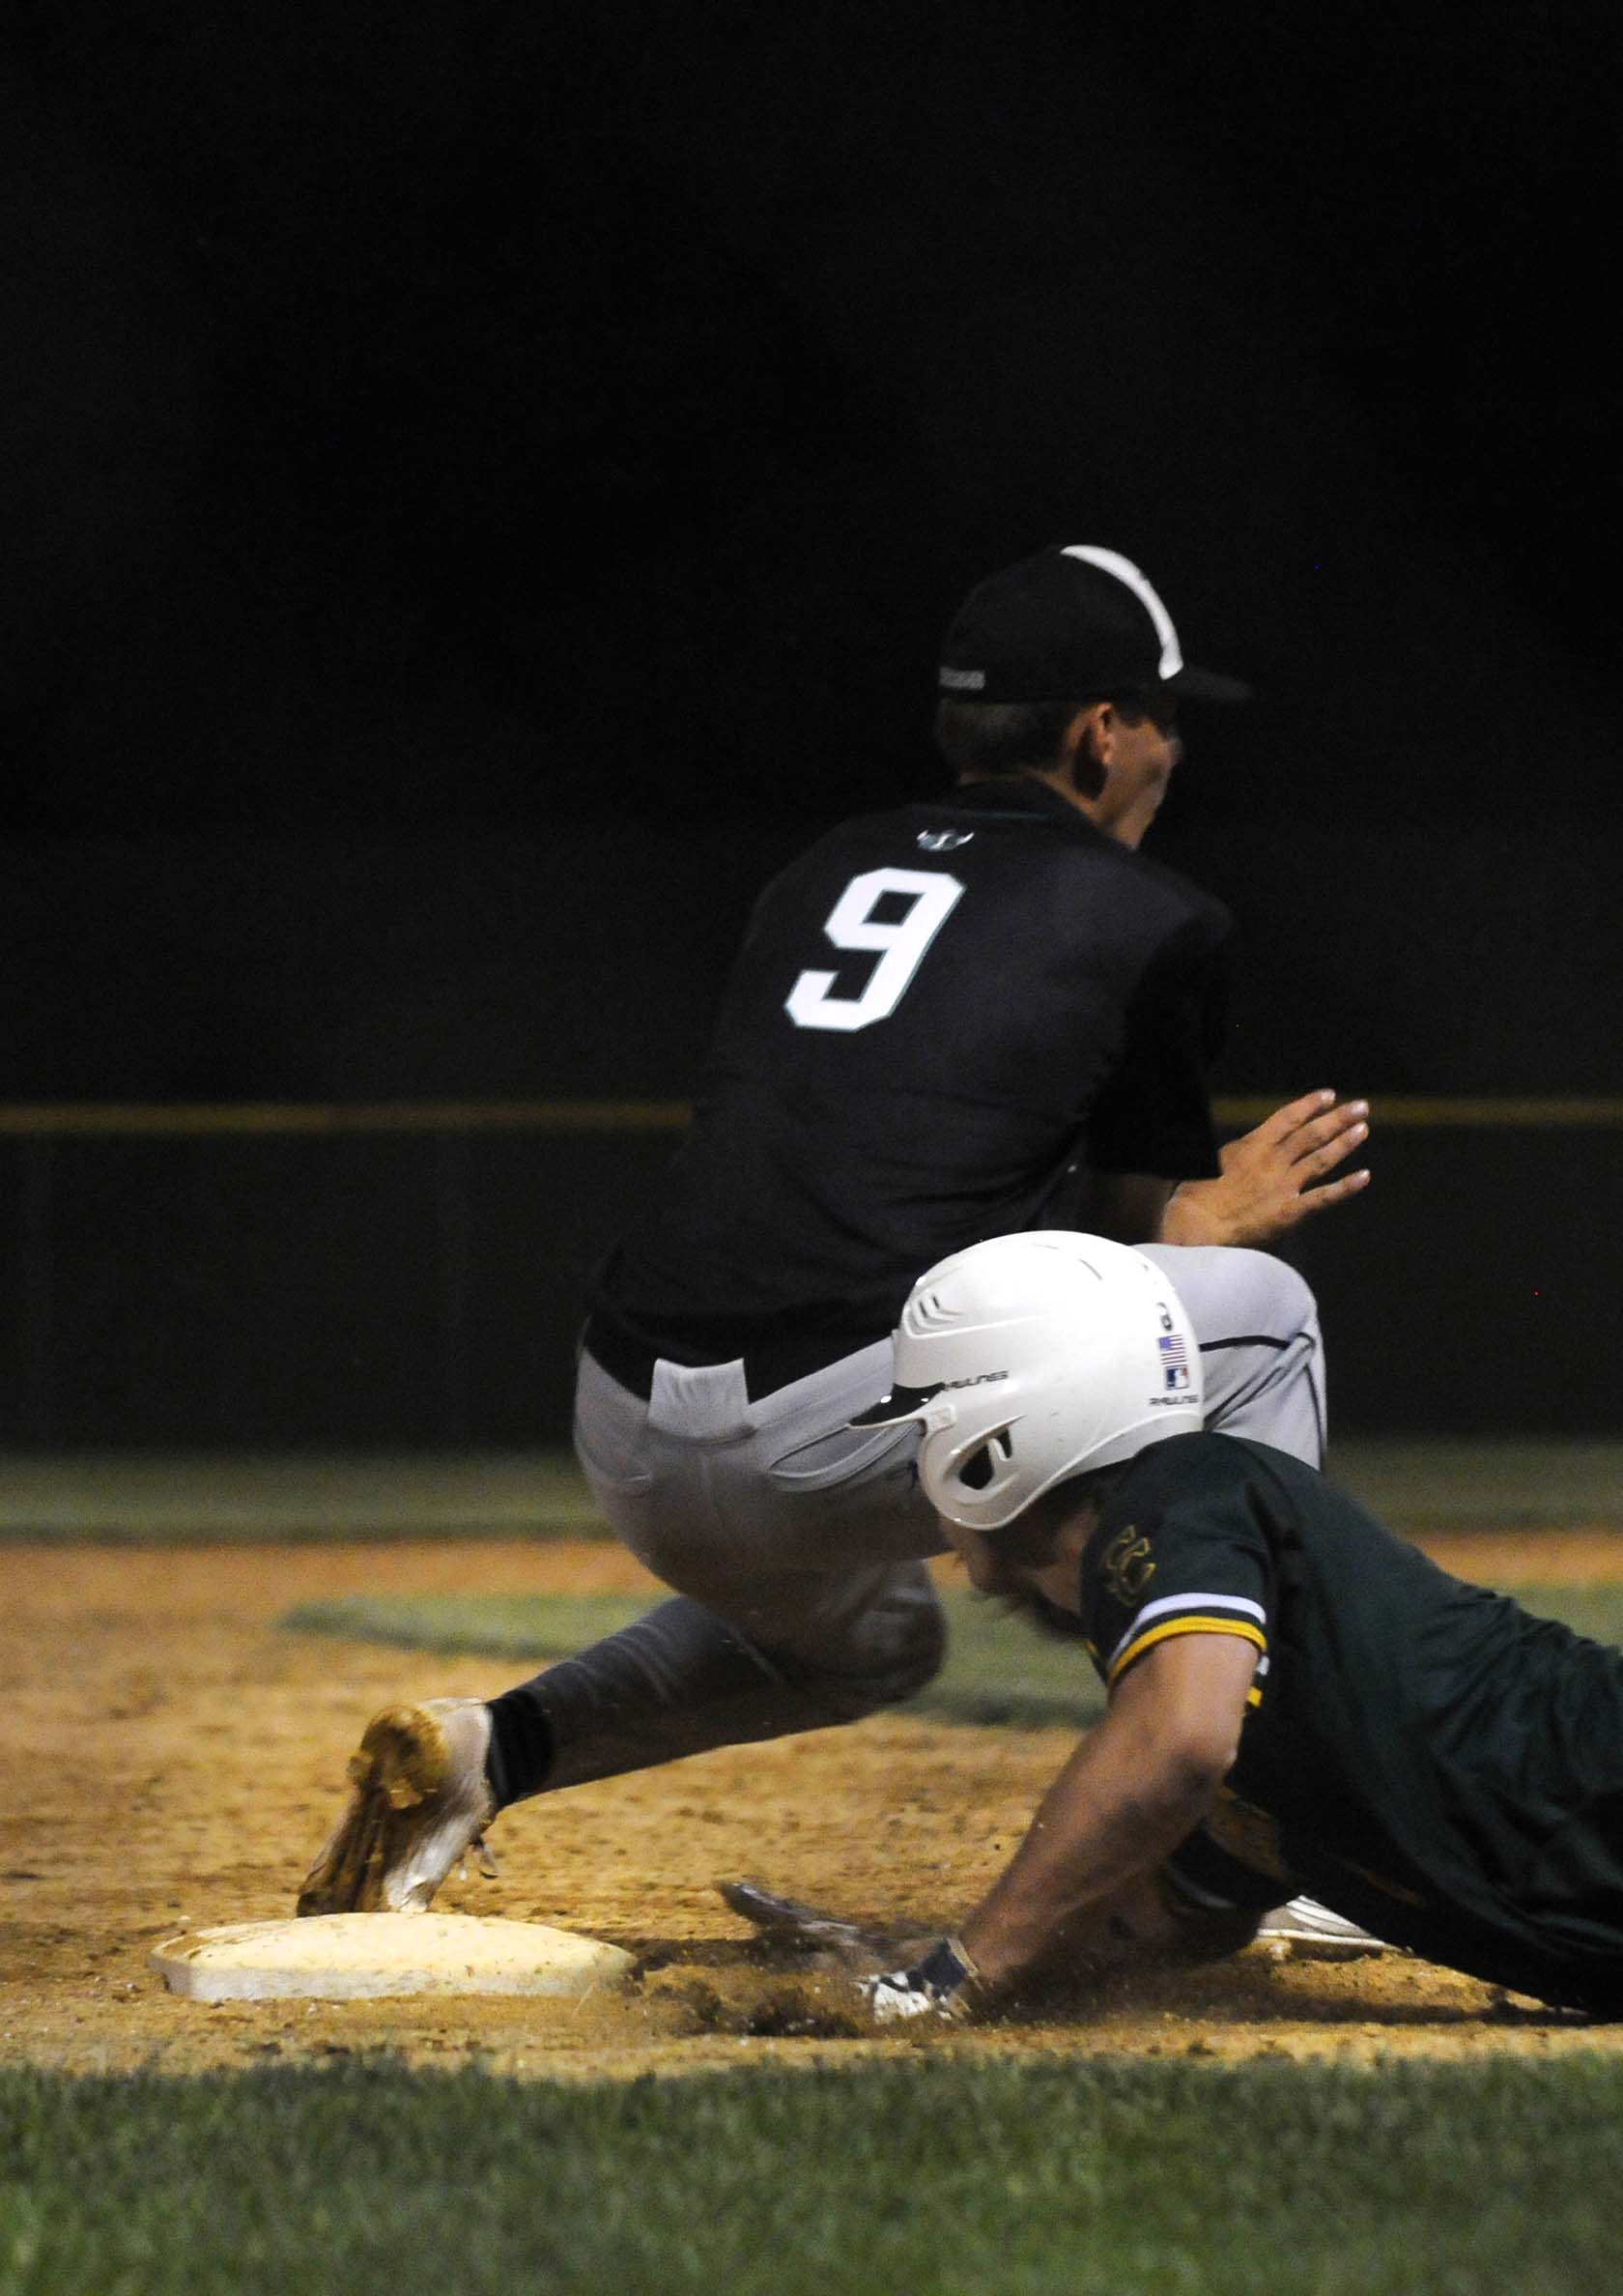  Coal City player Austin Pullara slides safely to third base after trying to steal home Thursday during a game at Ottawa High School against Illiana Christian. Coal City beat Illiana Christian 3-1.    